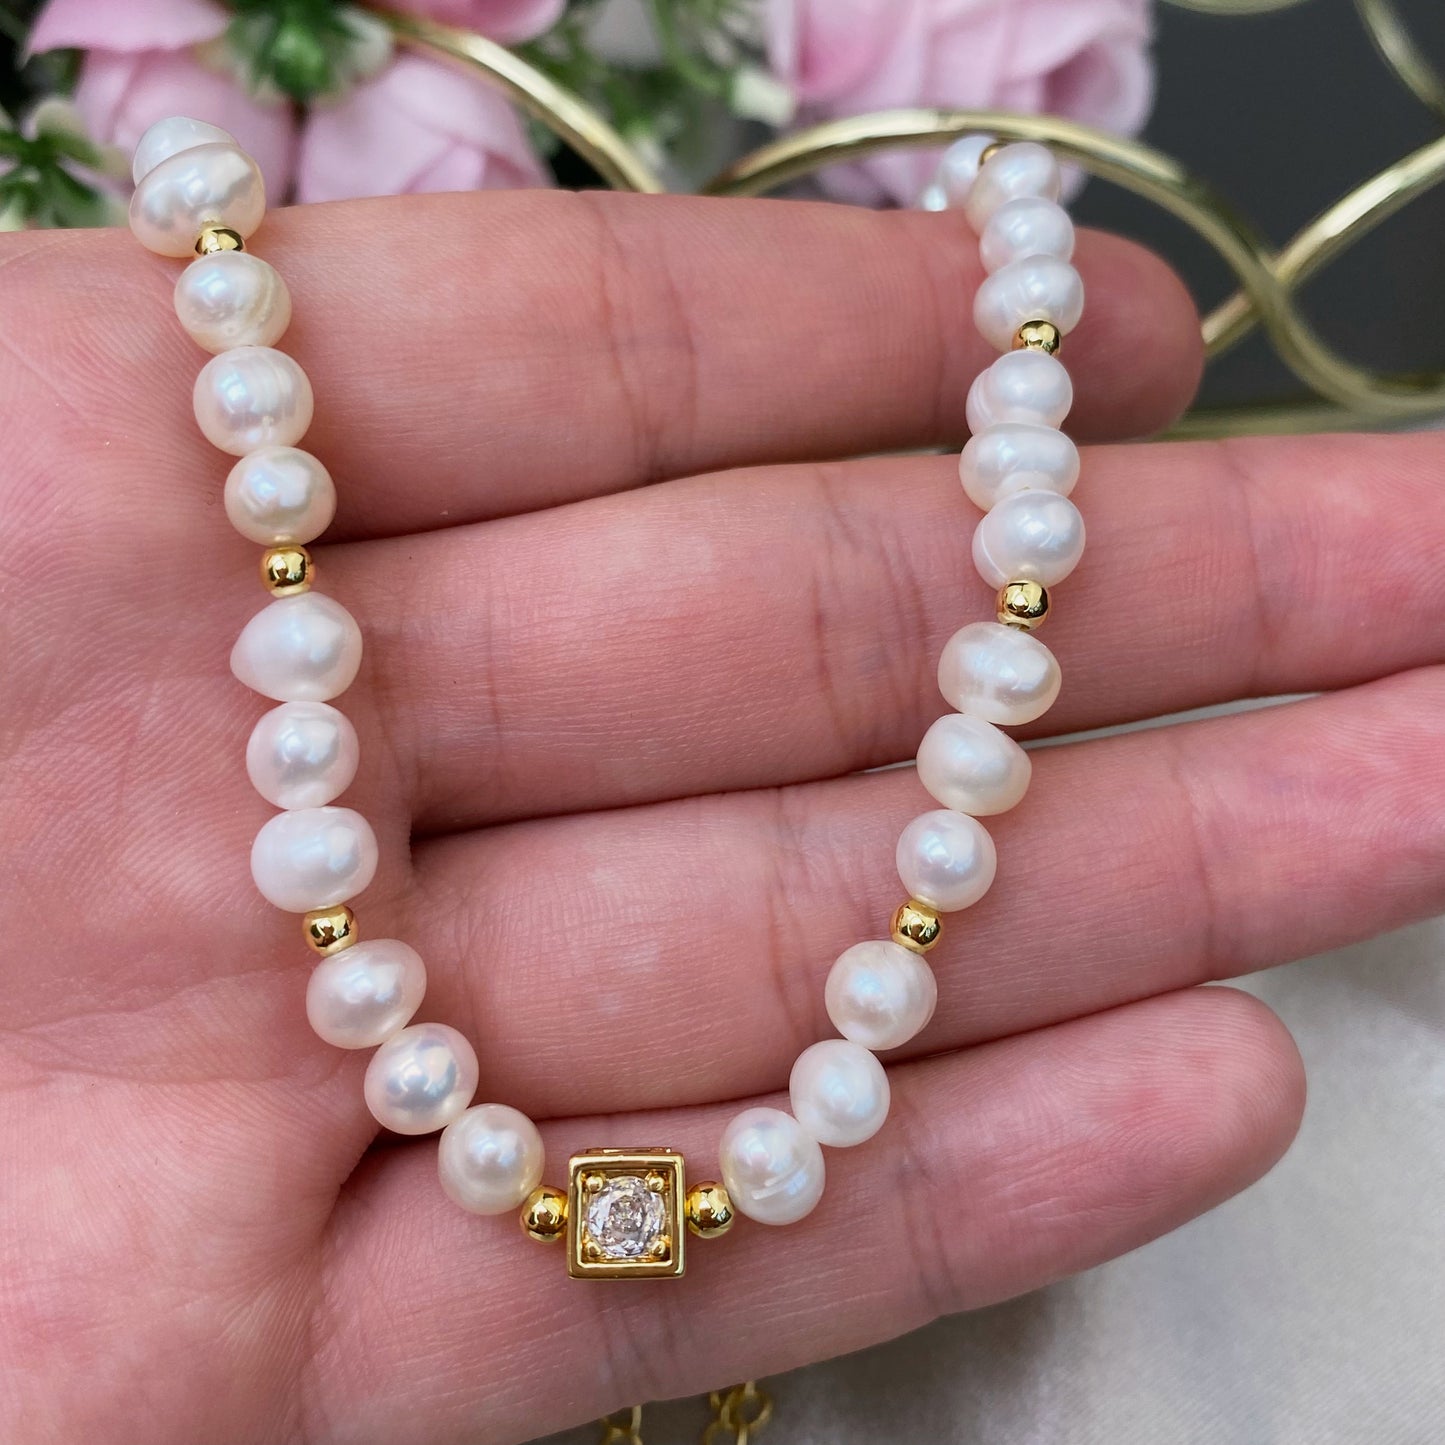 River Pearls necklace with decorative crystal (adjustable length 37cm+5cm)